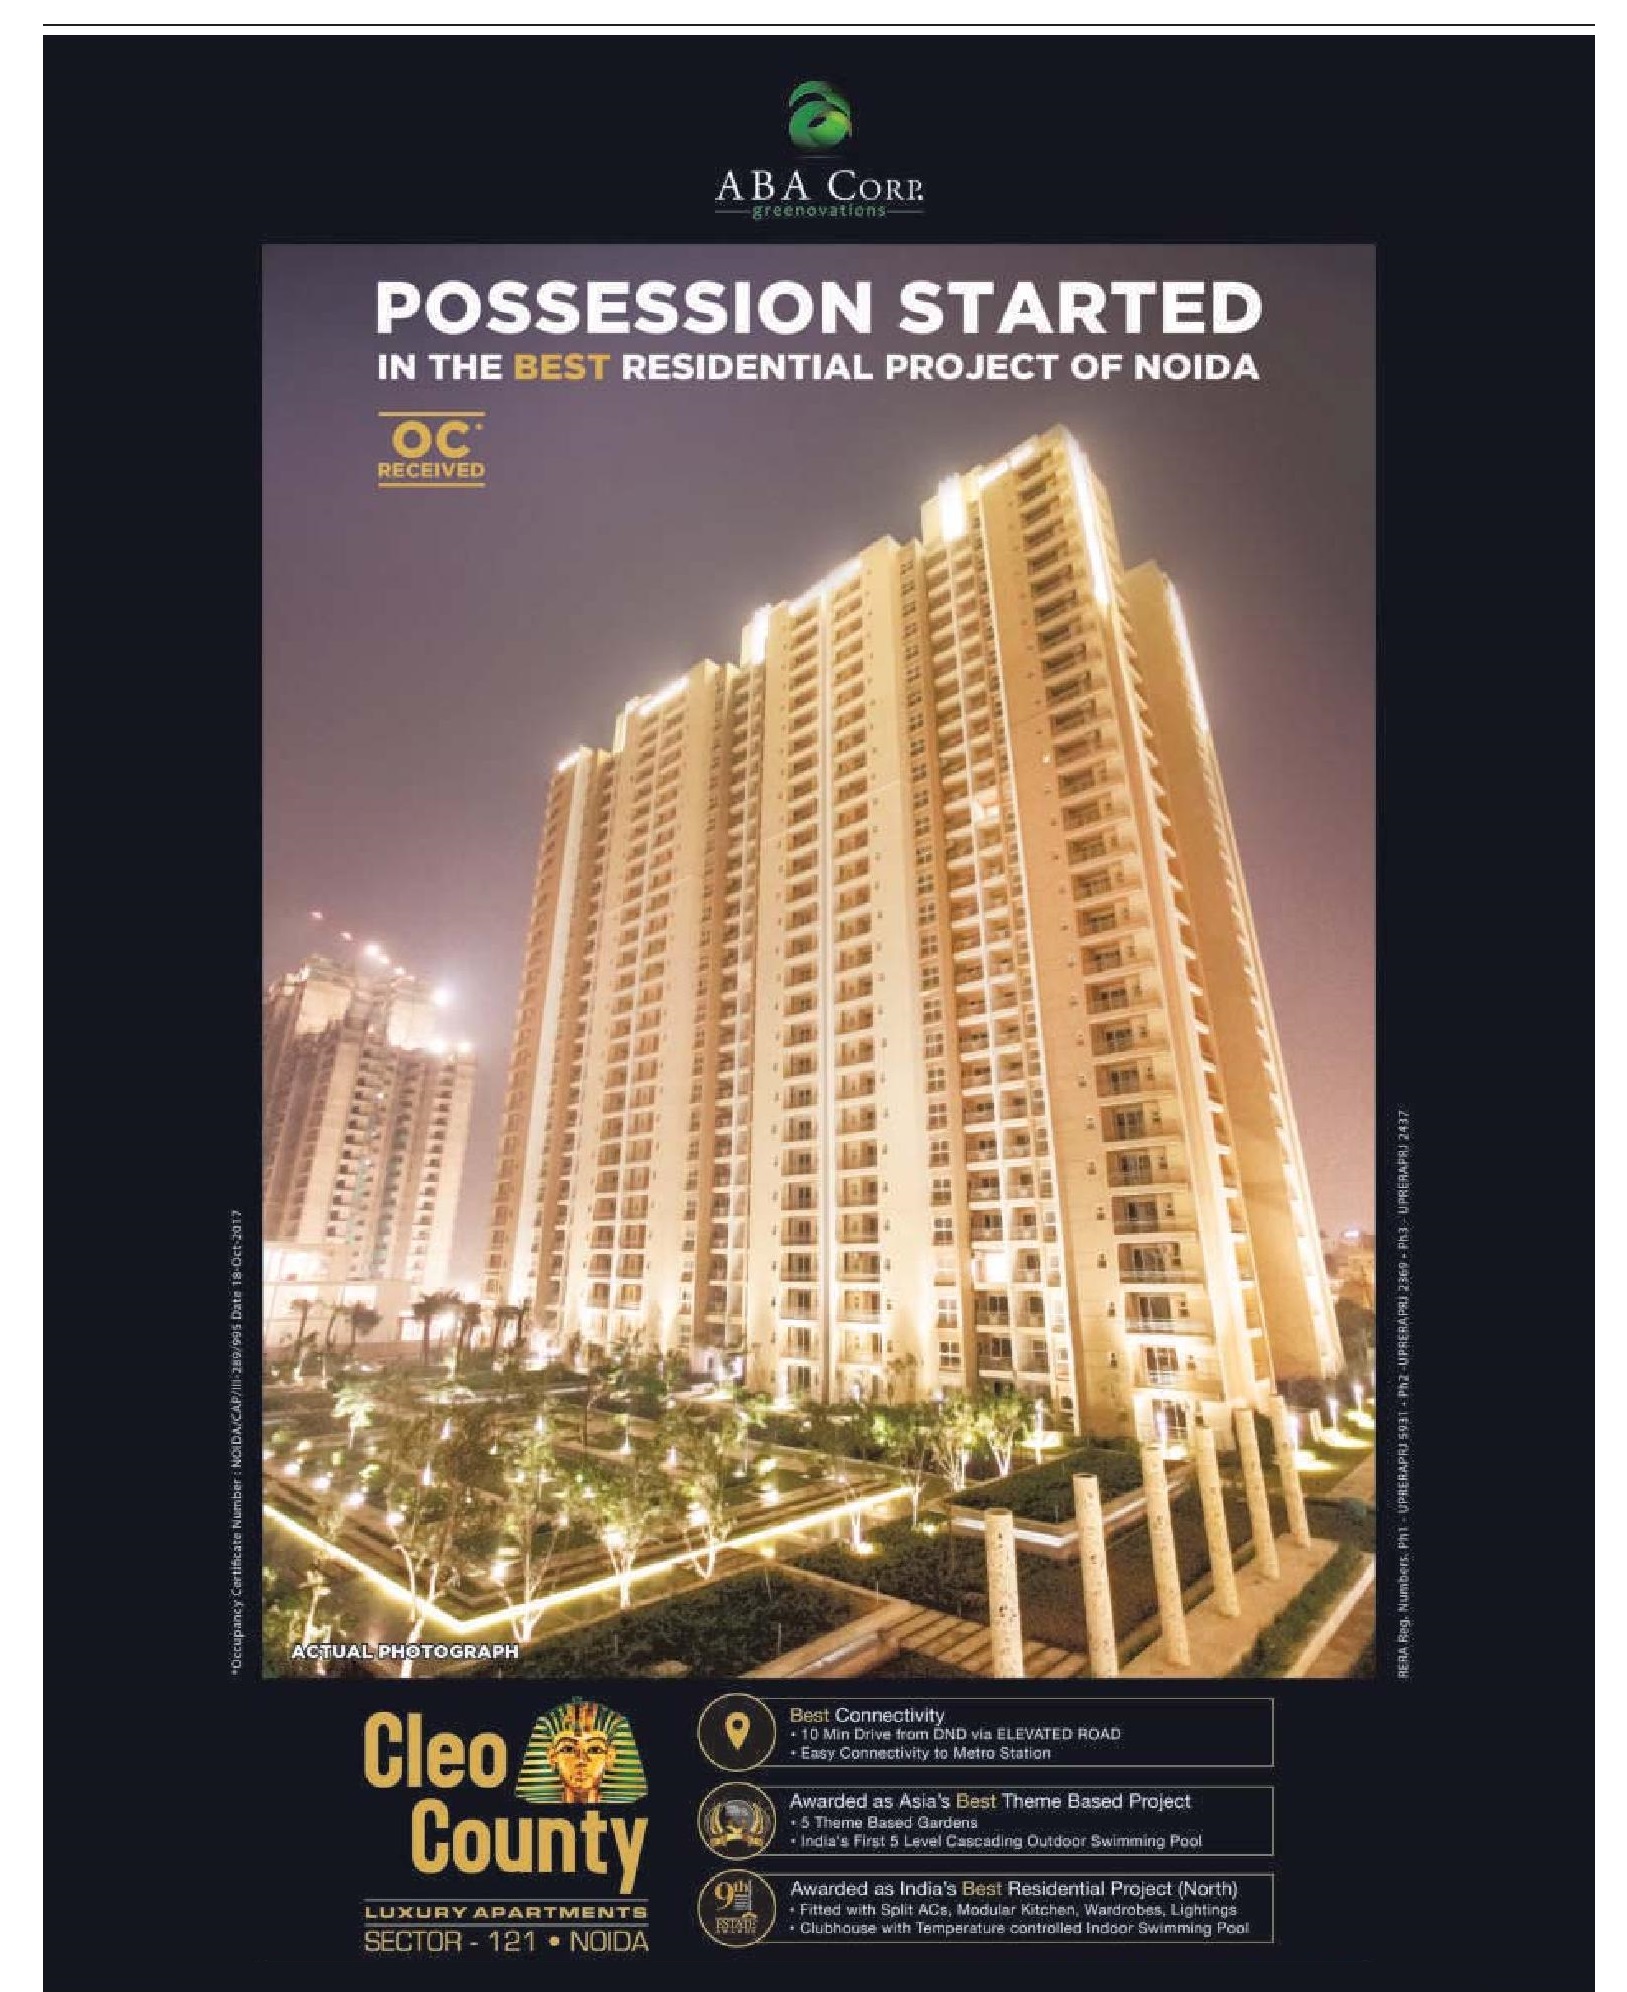 ABA Cleo County - Possession started in the best residential project of Noida